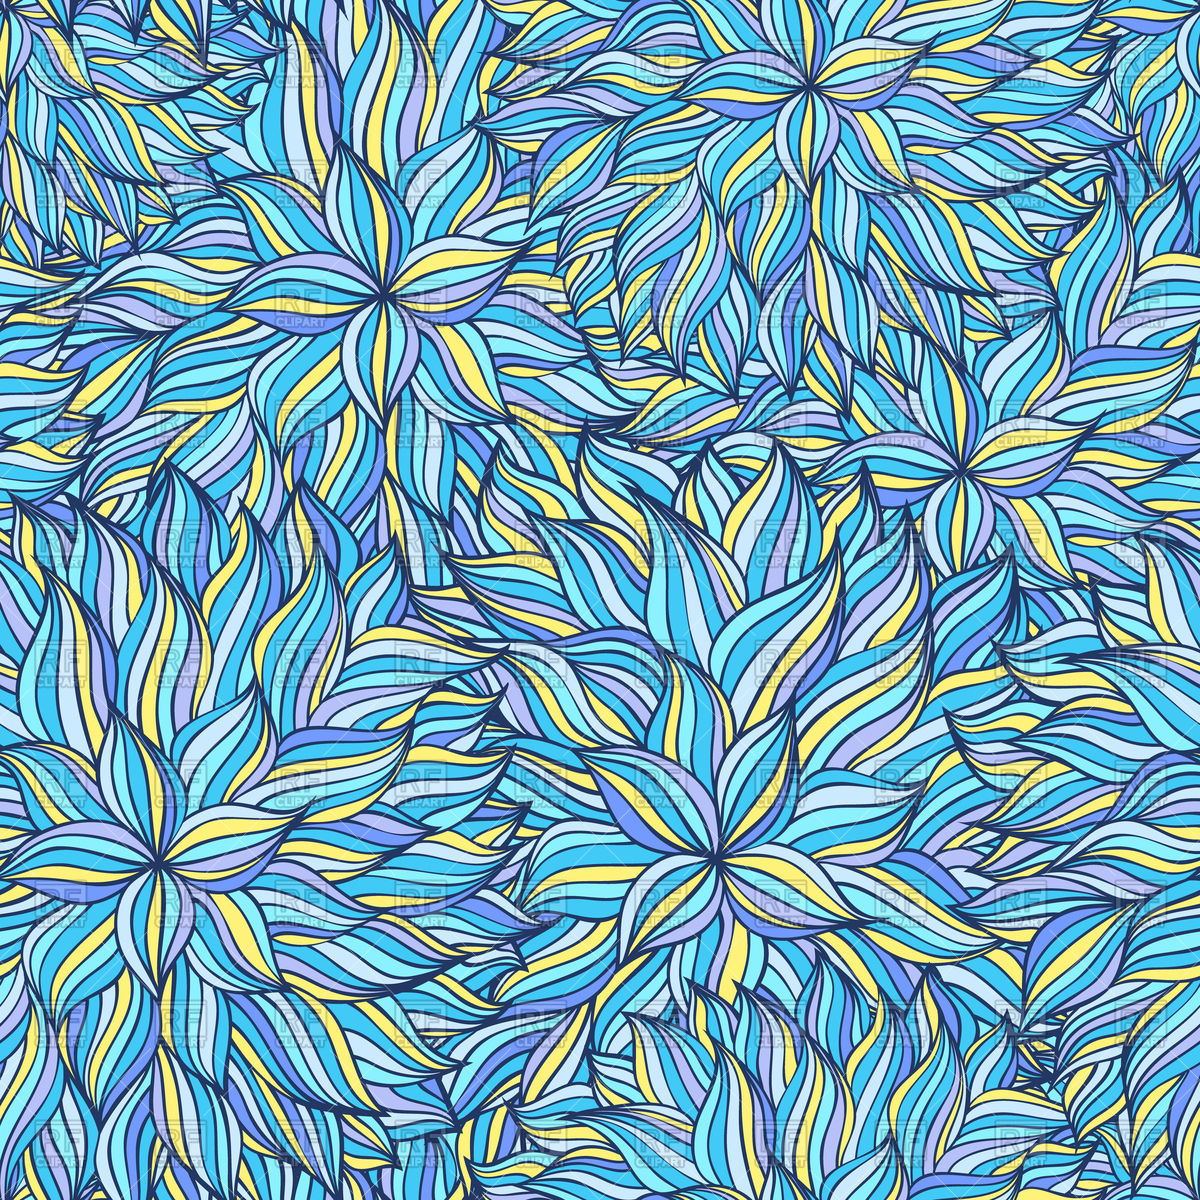 blue-abstract-psychedelic-seamless-pattern-Download-Royalty-free-Vector-File-EPS-197605